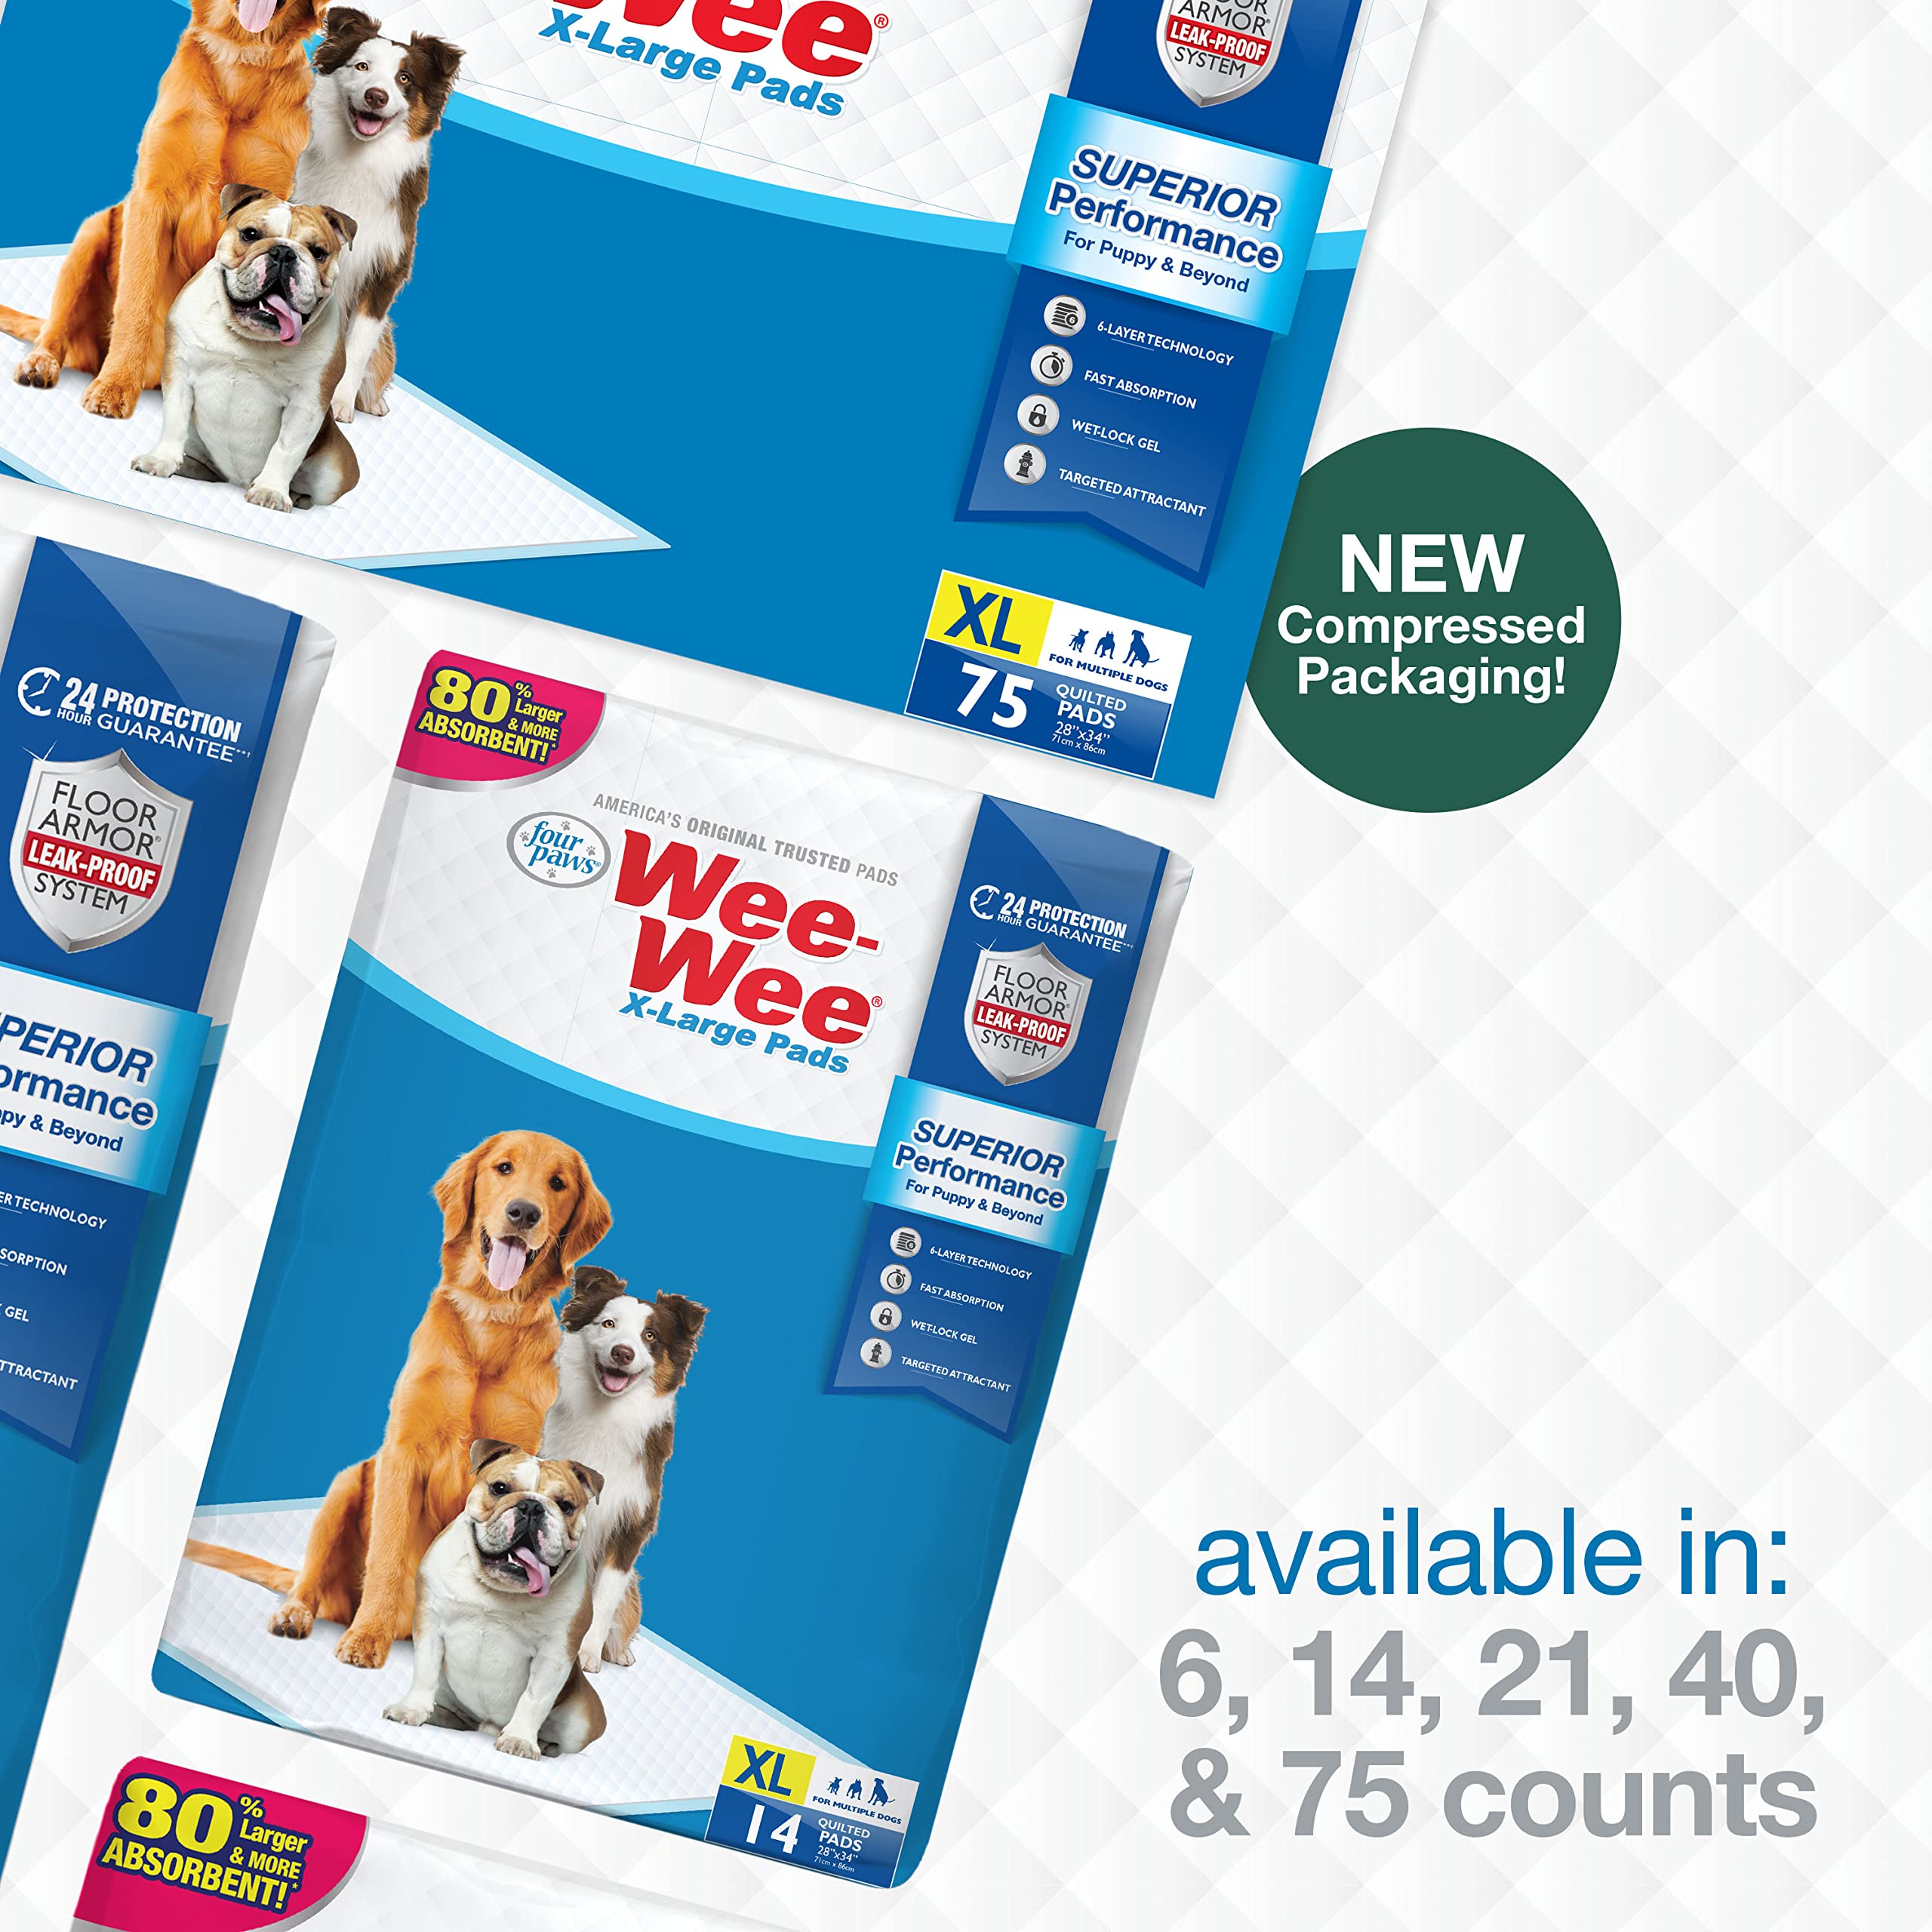 Four Paws Wee-Wee Superior Performance X-Large Dog Pee Pads - Dog & Puppy Pads for Potty Training - Dog Housebreaking & Puppy Supplies - 28